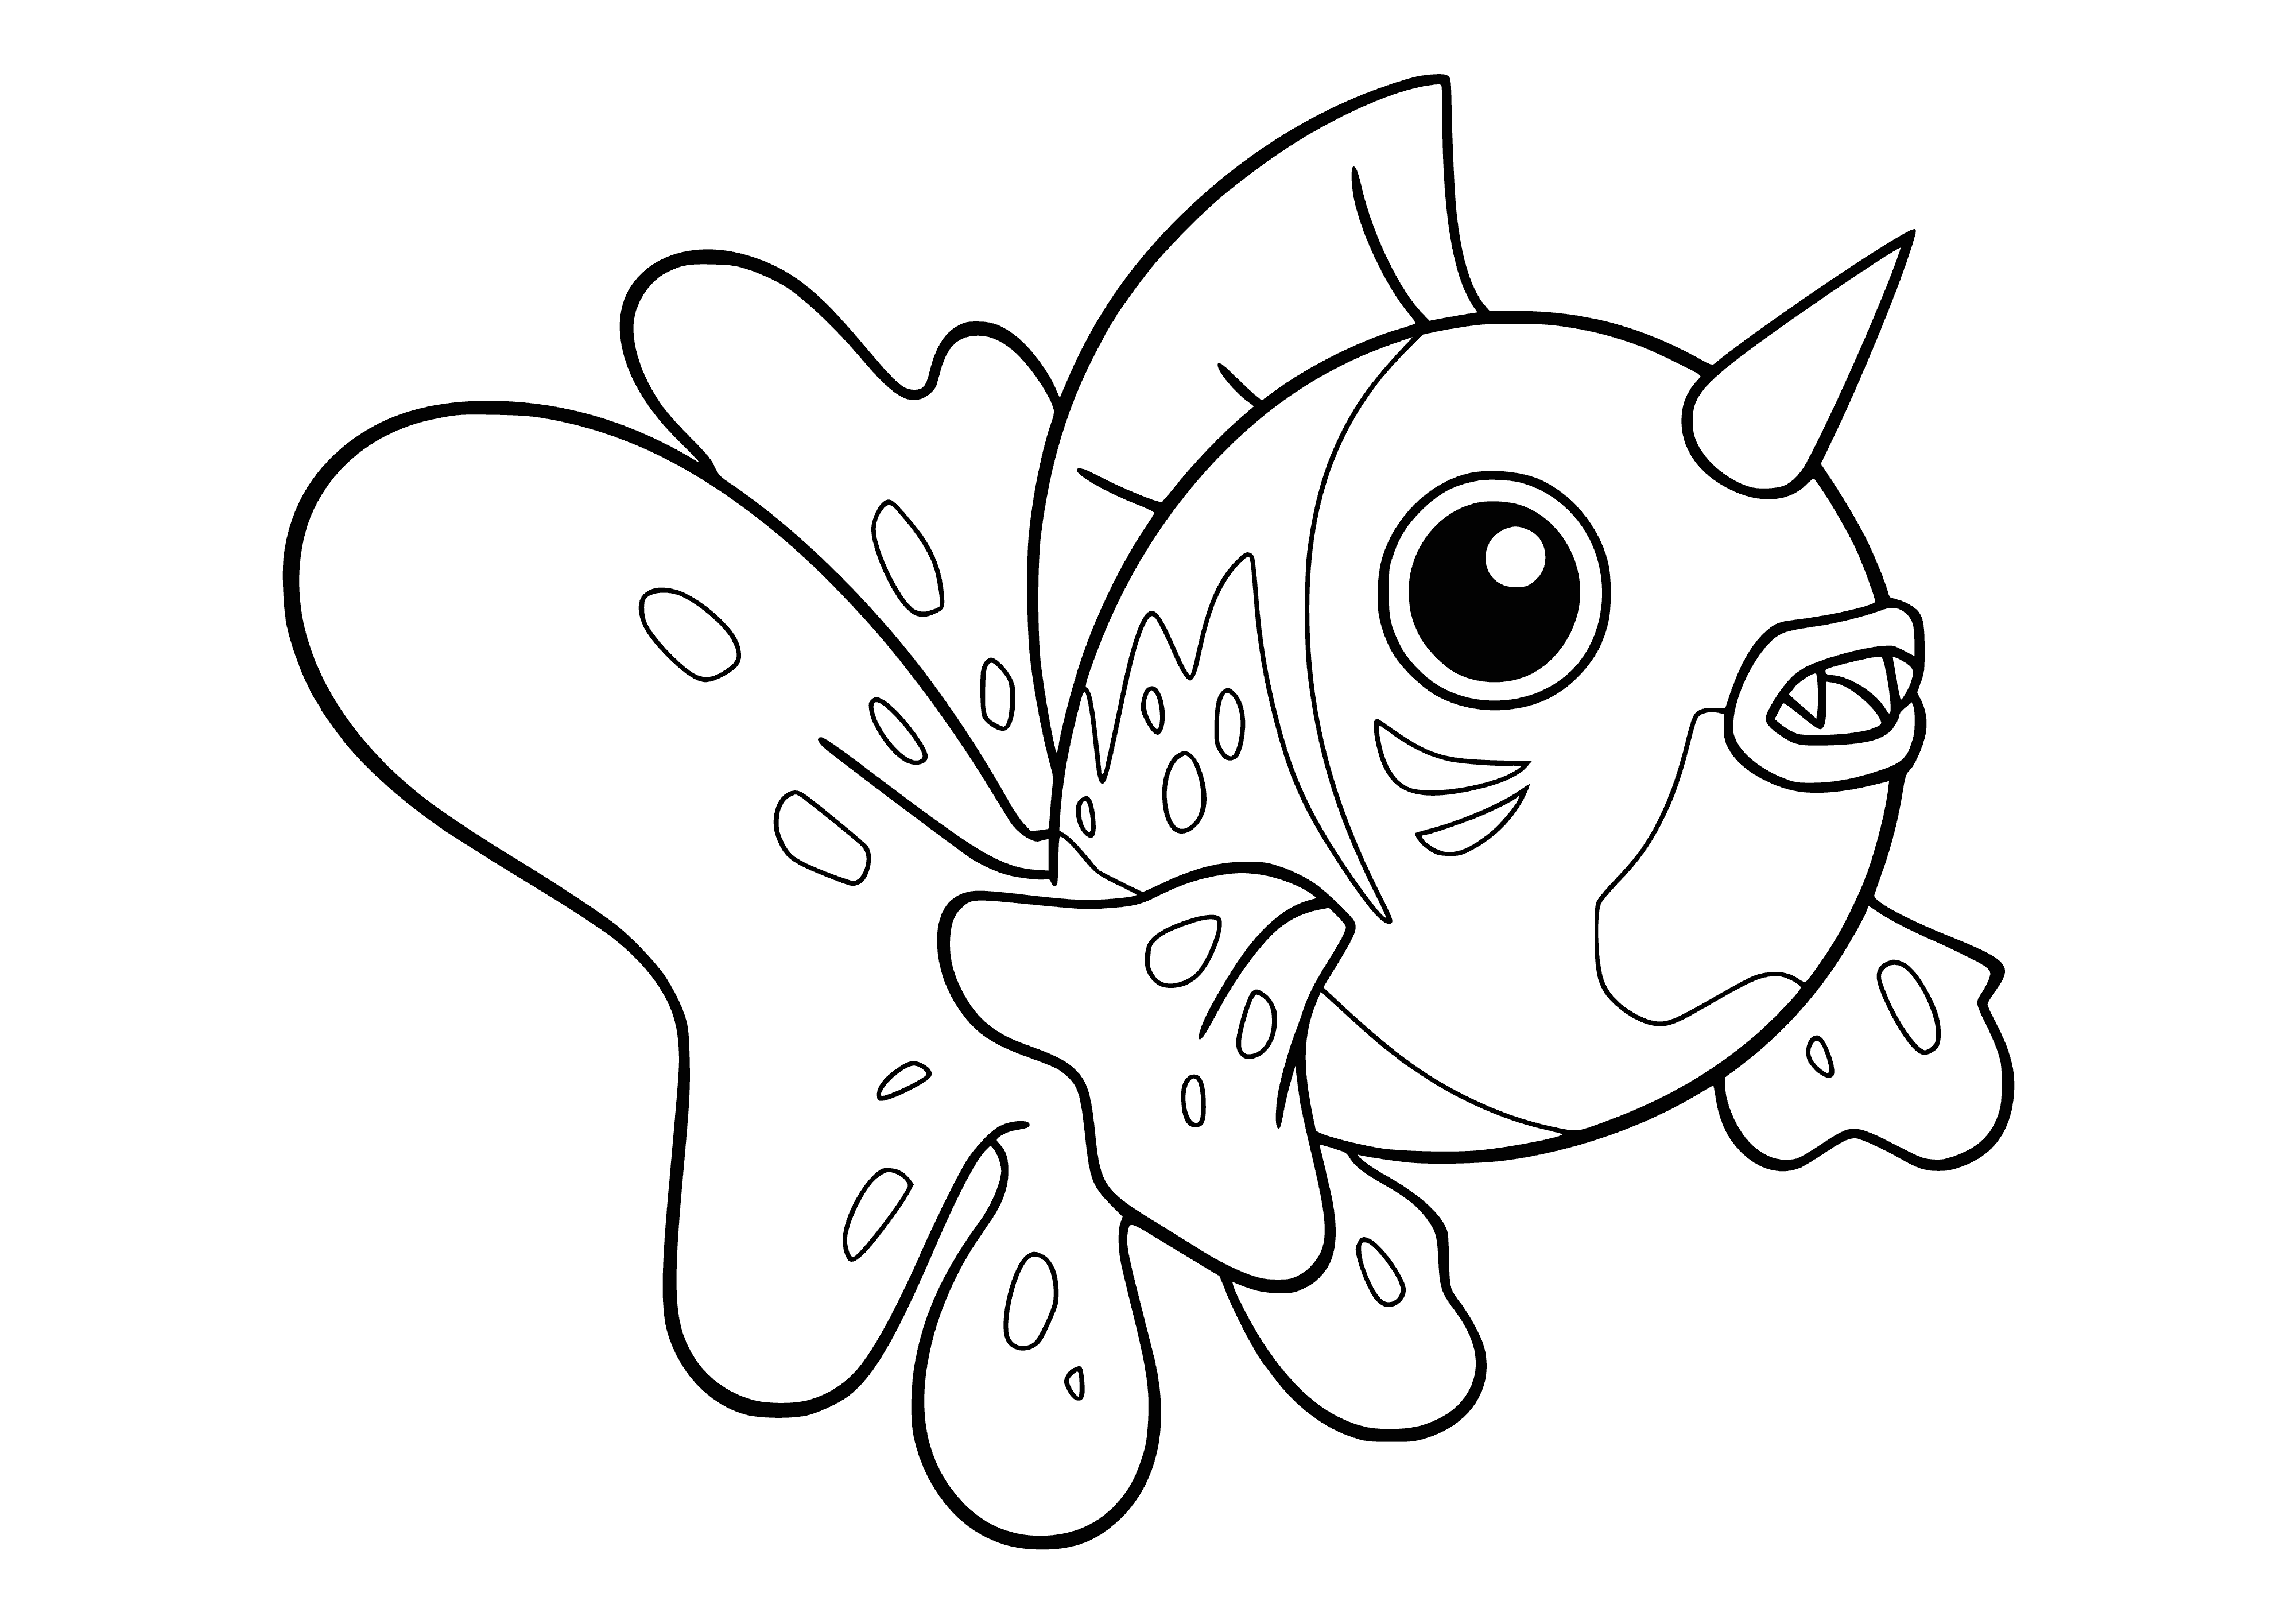 coloring page: An orange and white fish Pokémon with a bill-like snout, large fins, yellow horns, and a long streamer-like tail.